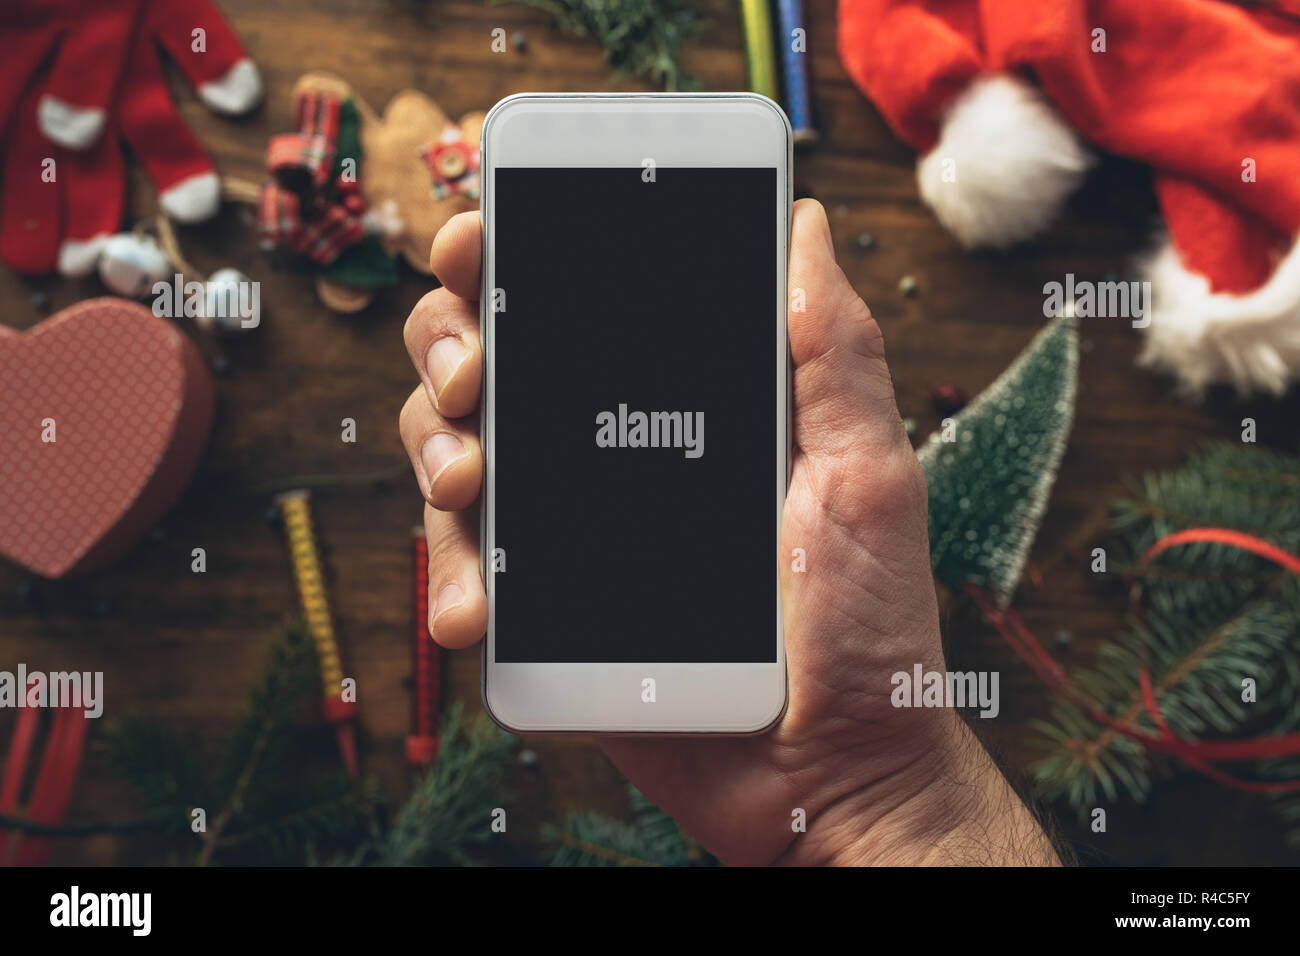 Smartphone in hand for Christmas season mock up with festive holiday decoration in background. Stock Photo